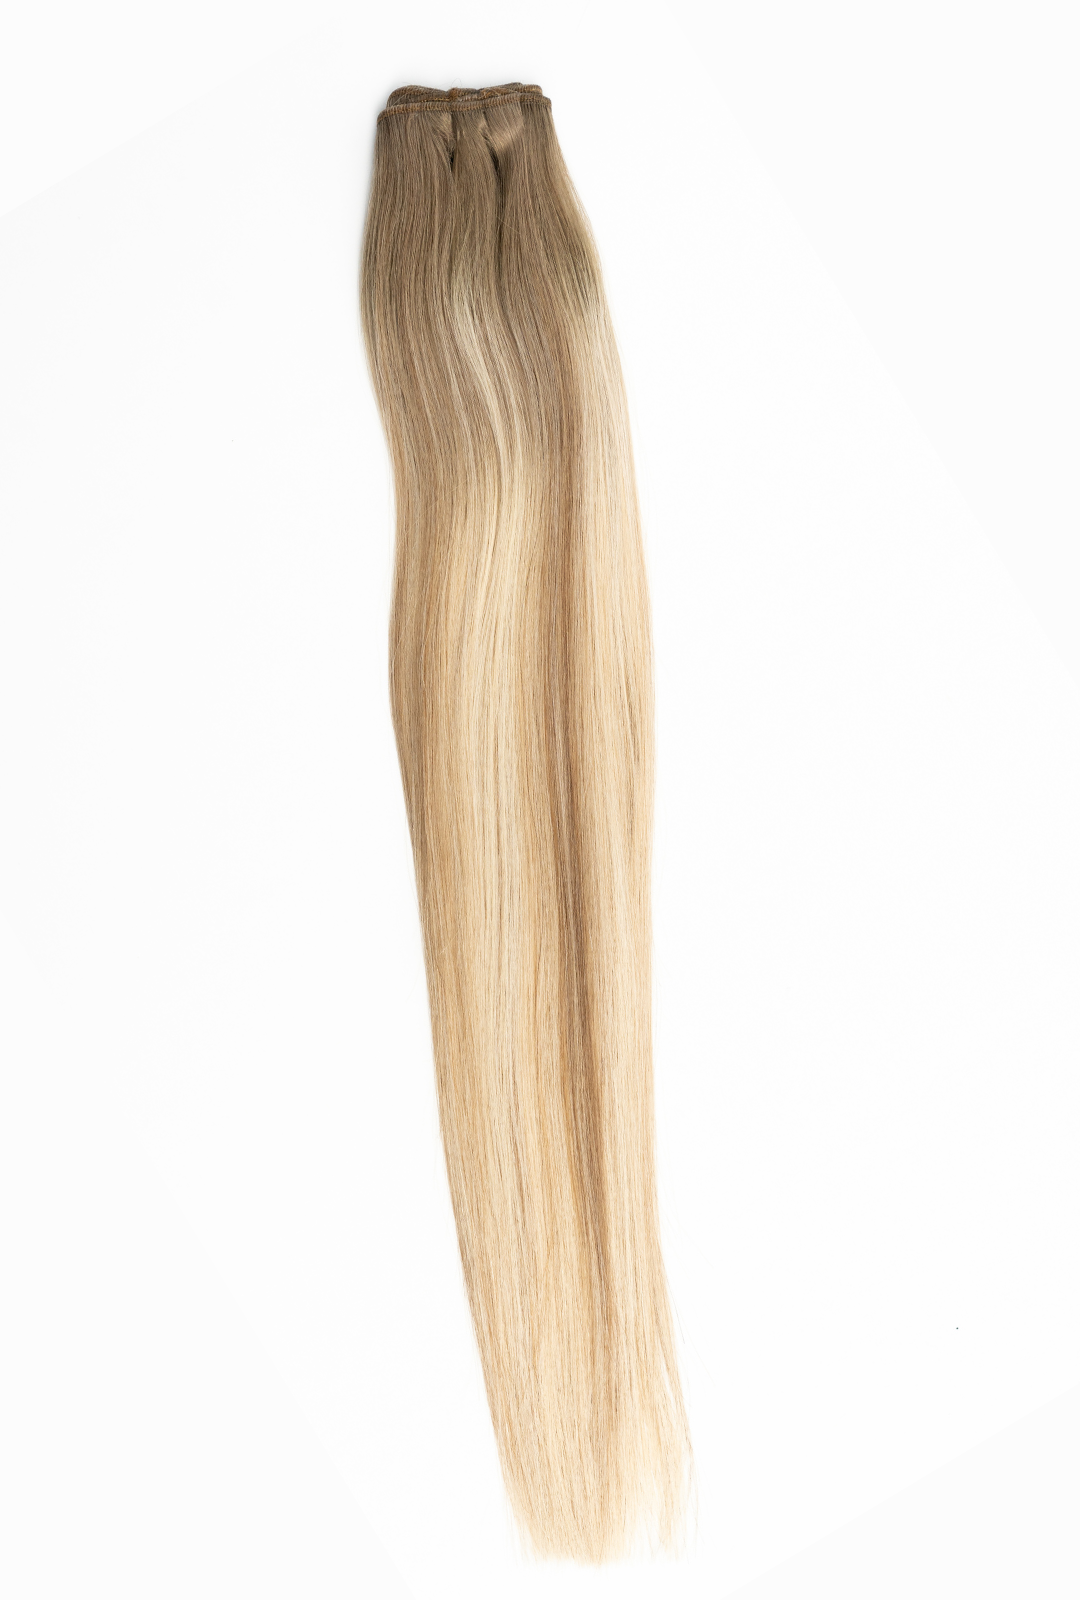 Beachwashed X Laced Hair Machine Sewn Weft Extensions - Salt